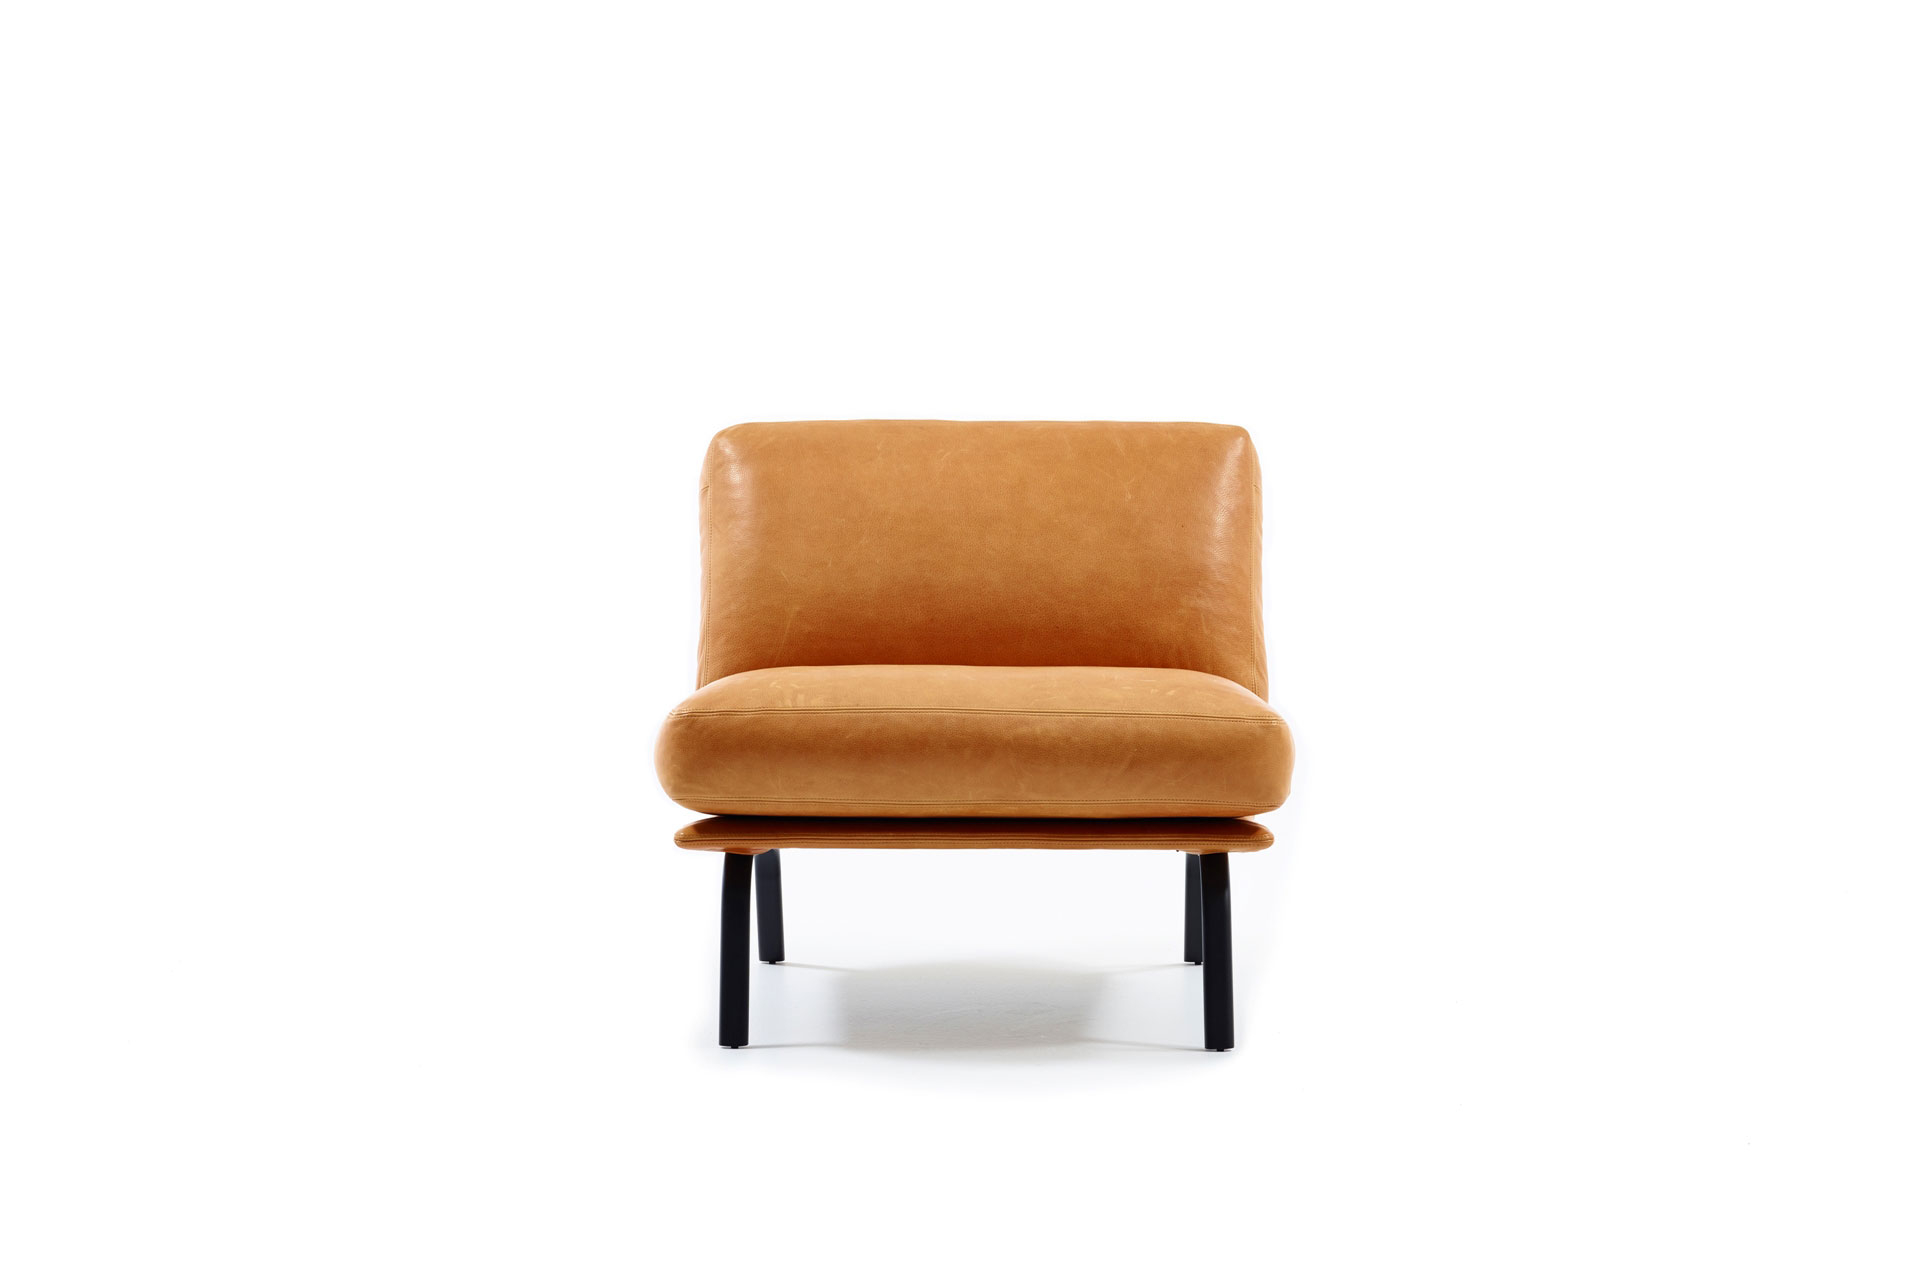 NEWPORT Chair by Alain Monnens for Durlet